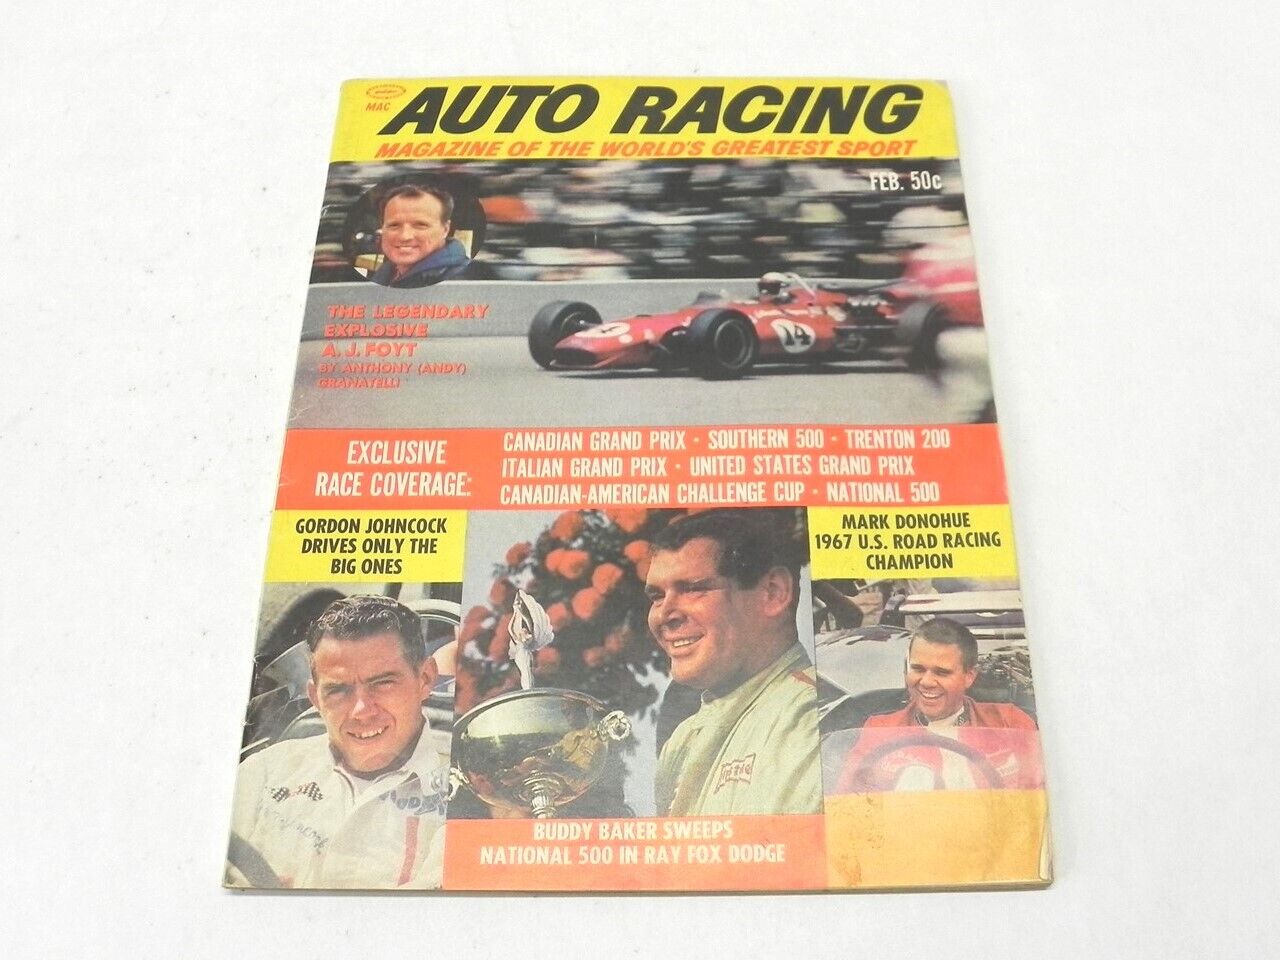 VINTAGE FEB 1967 AUTO RACING EXCLUSIVE RACE COVERAGE BUDDY BAKERS A.J FOYT USED 